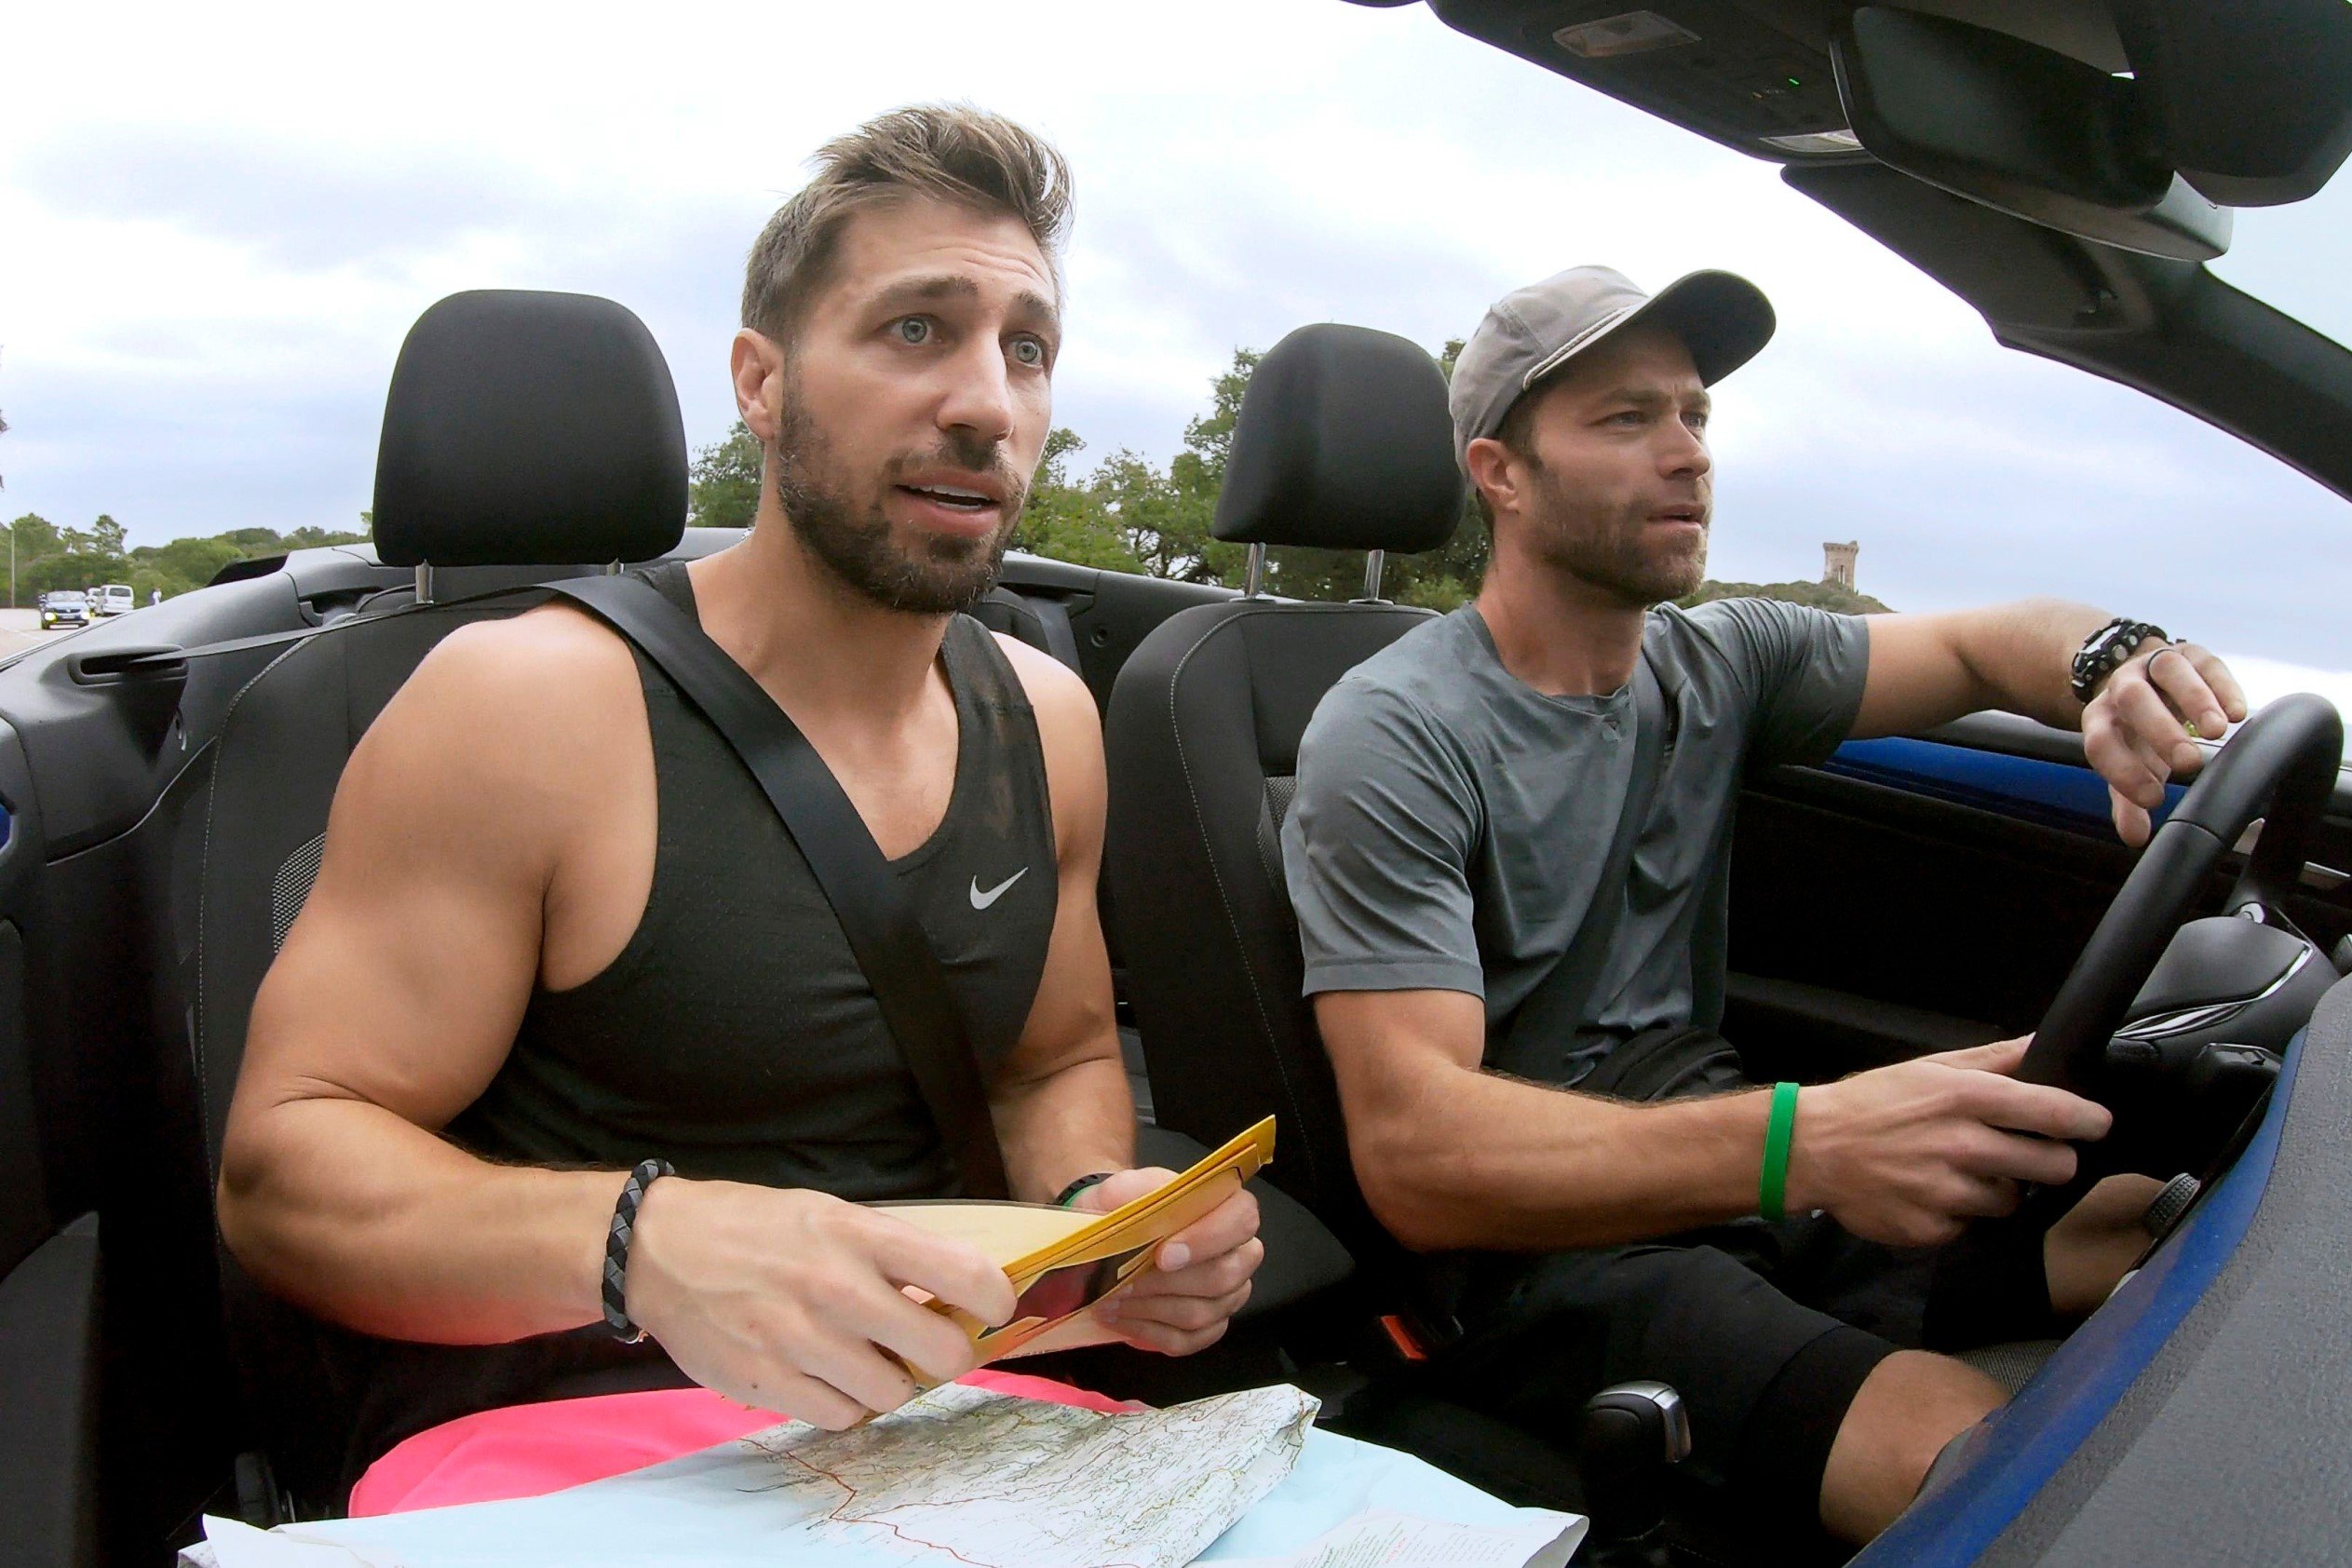 'The Amazing Race' Season 33 duo Ryan Ferguson and Dusty Harris ride in a car. Ryan wears a black tank top and pink shorts. Dusty wears a gray shirt, black shorts, and a gray hat.